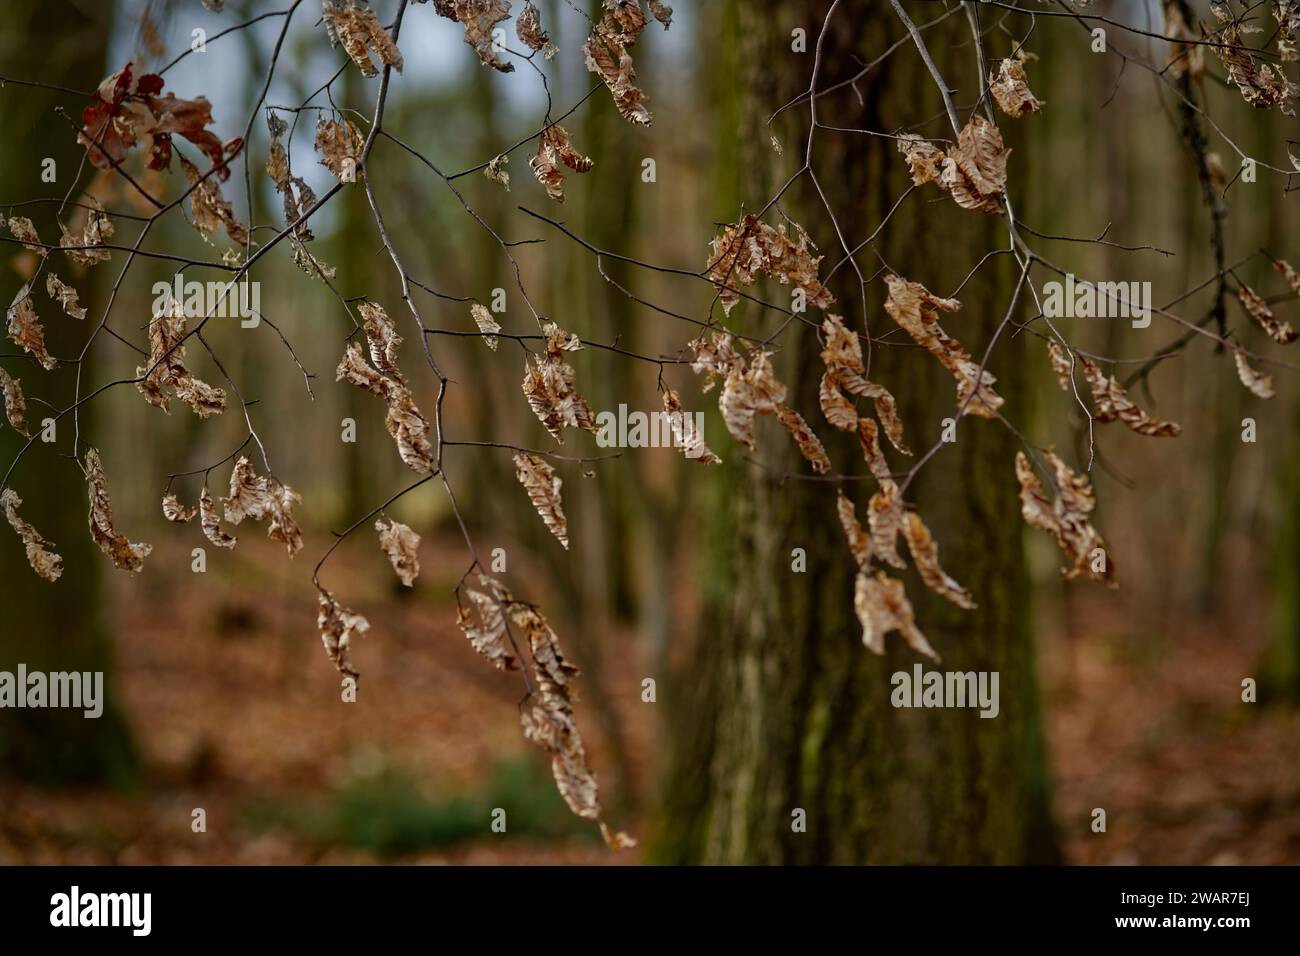 Focus on a branch with brown and dry dead leaves with a blurred background of woodland in brown and green colors Stock Photo